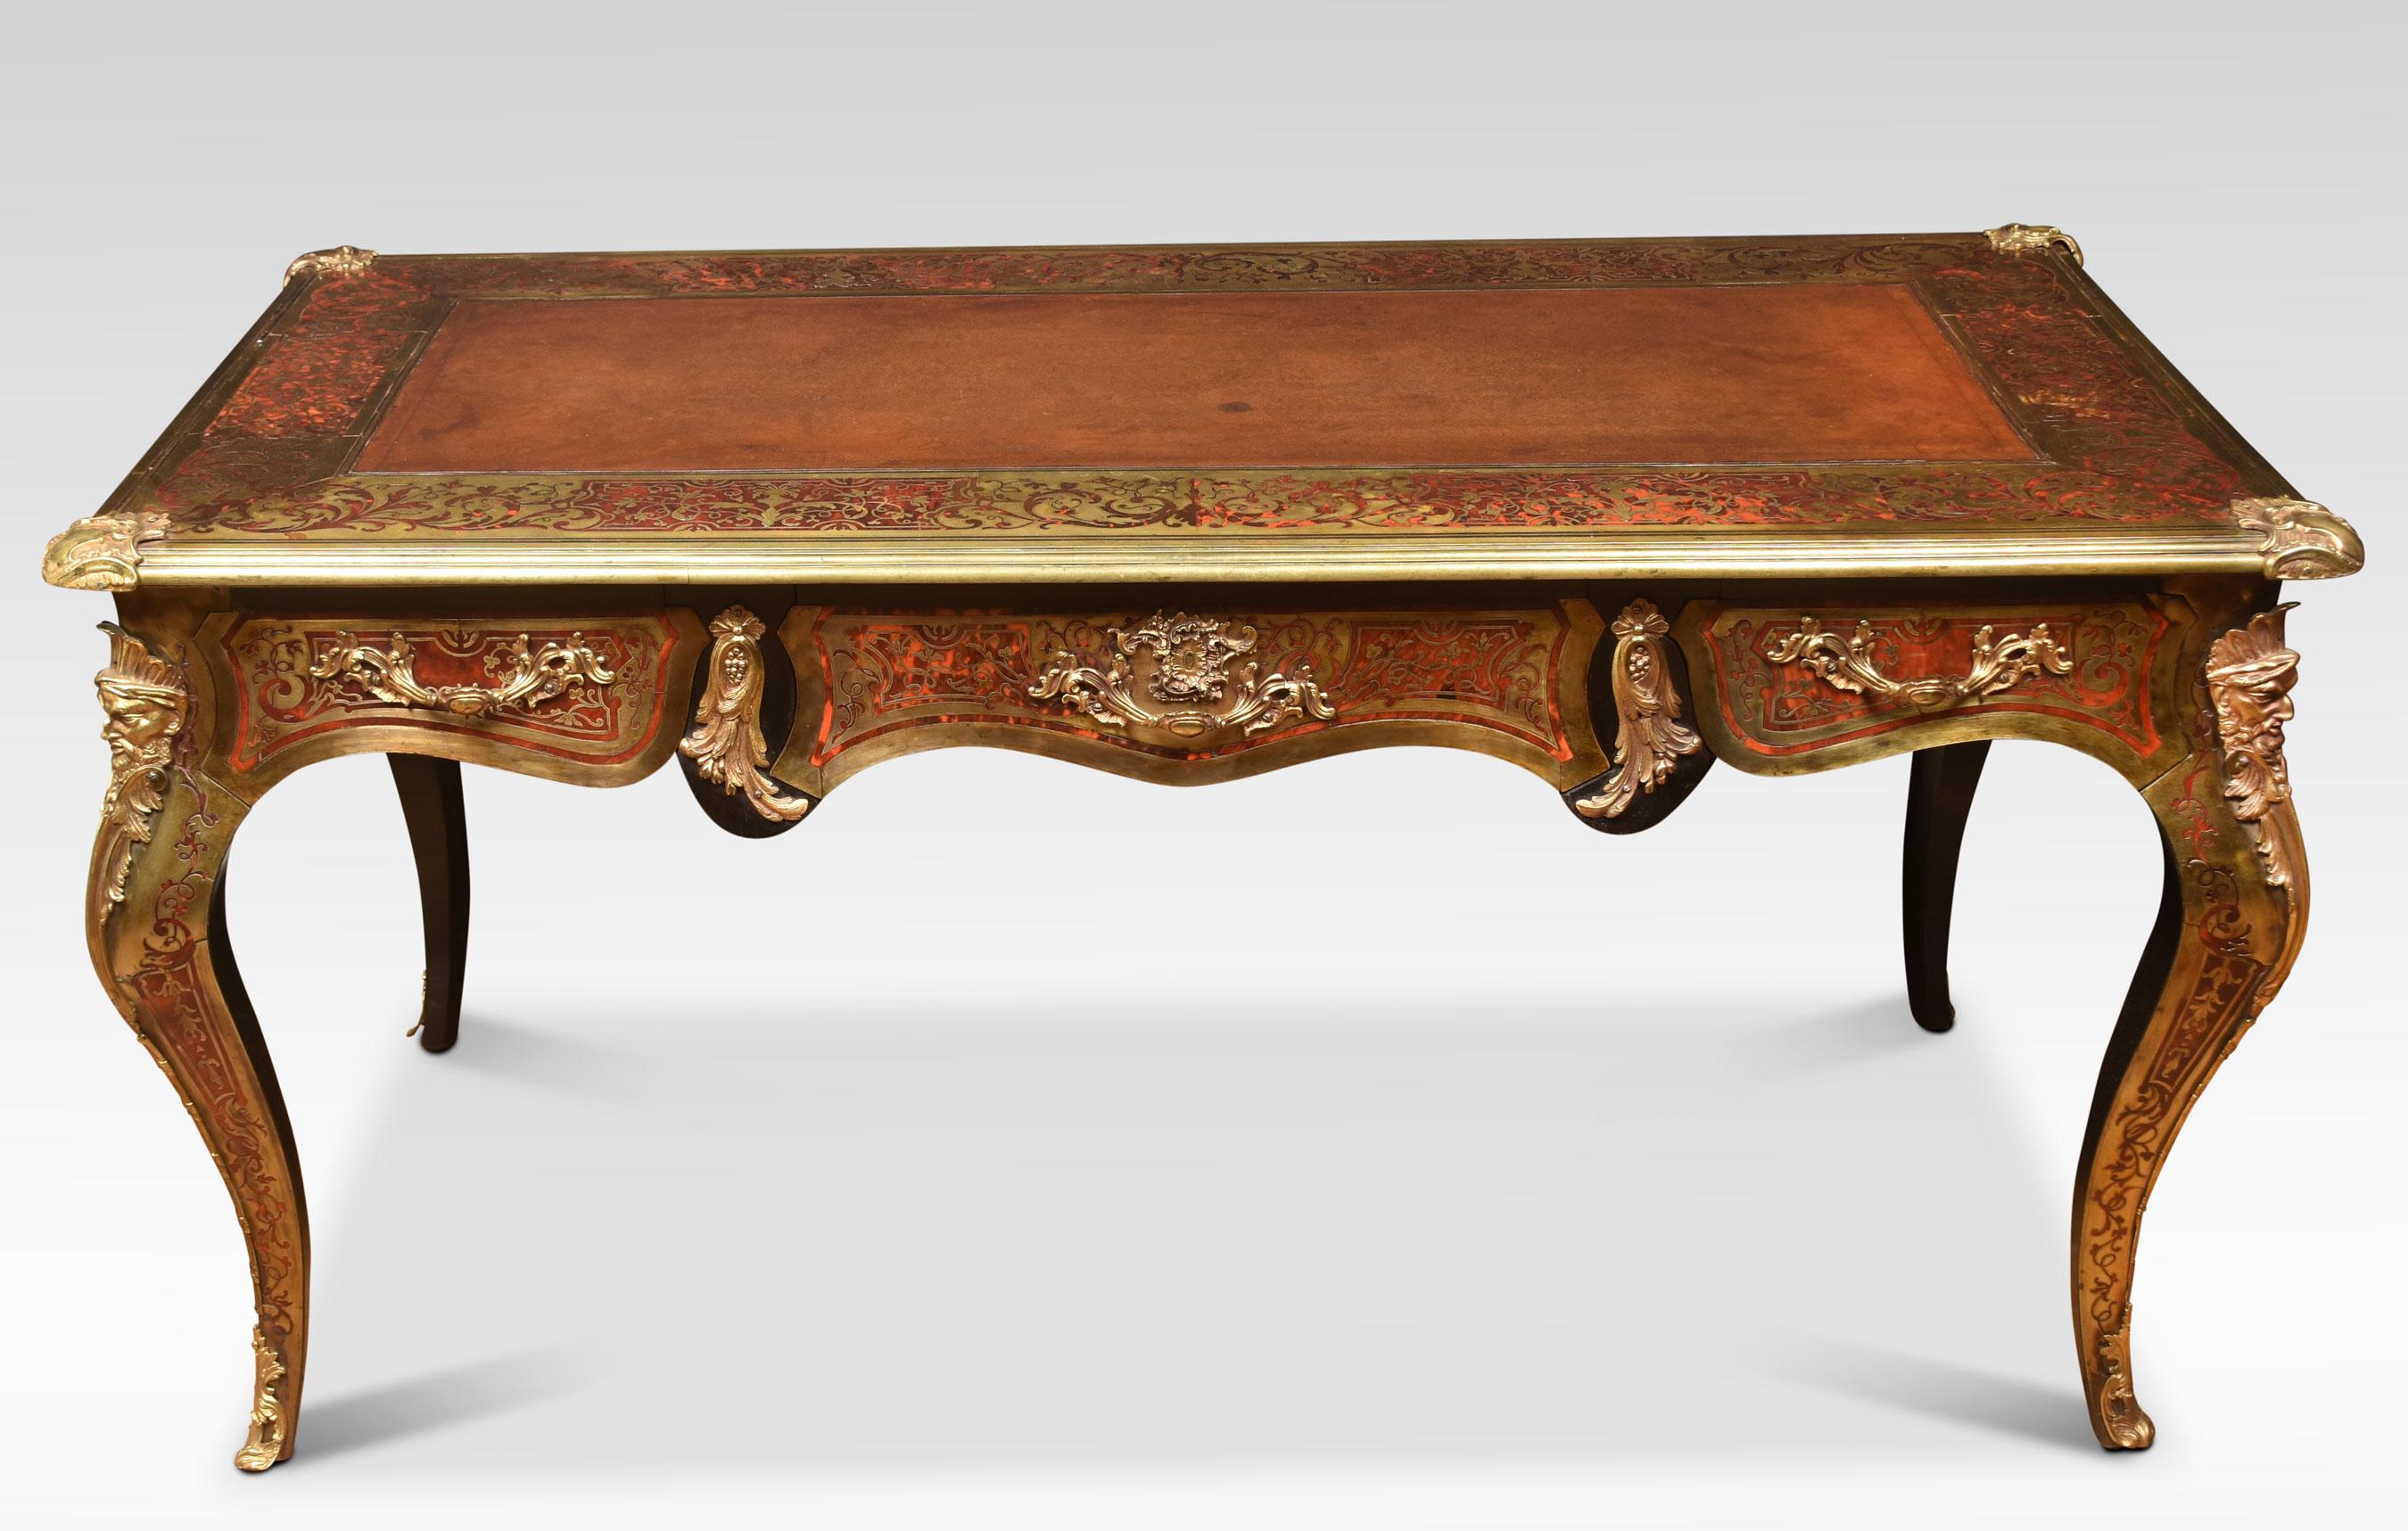 A fine Régence style Bureau plat in the Manner of André-Charles Boulle, inlaid all over with intricate brass embellishments on a red tortoiseshell ground and having ornate gilt metal mounts. The rectangular top with an engraved brass border